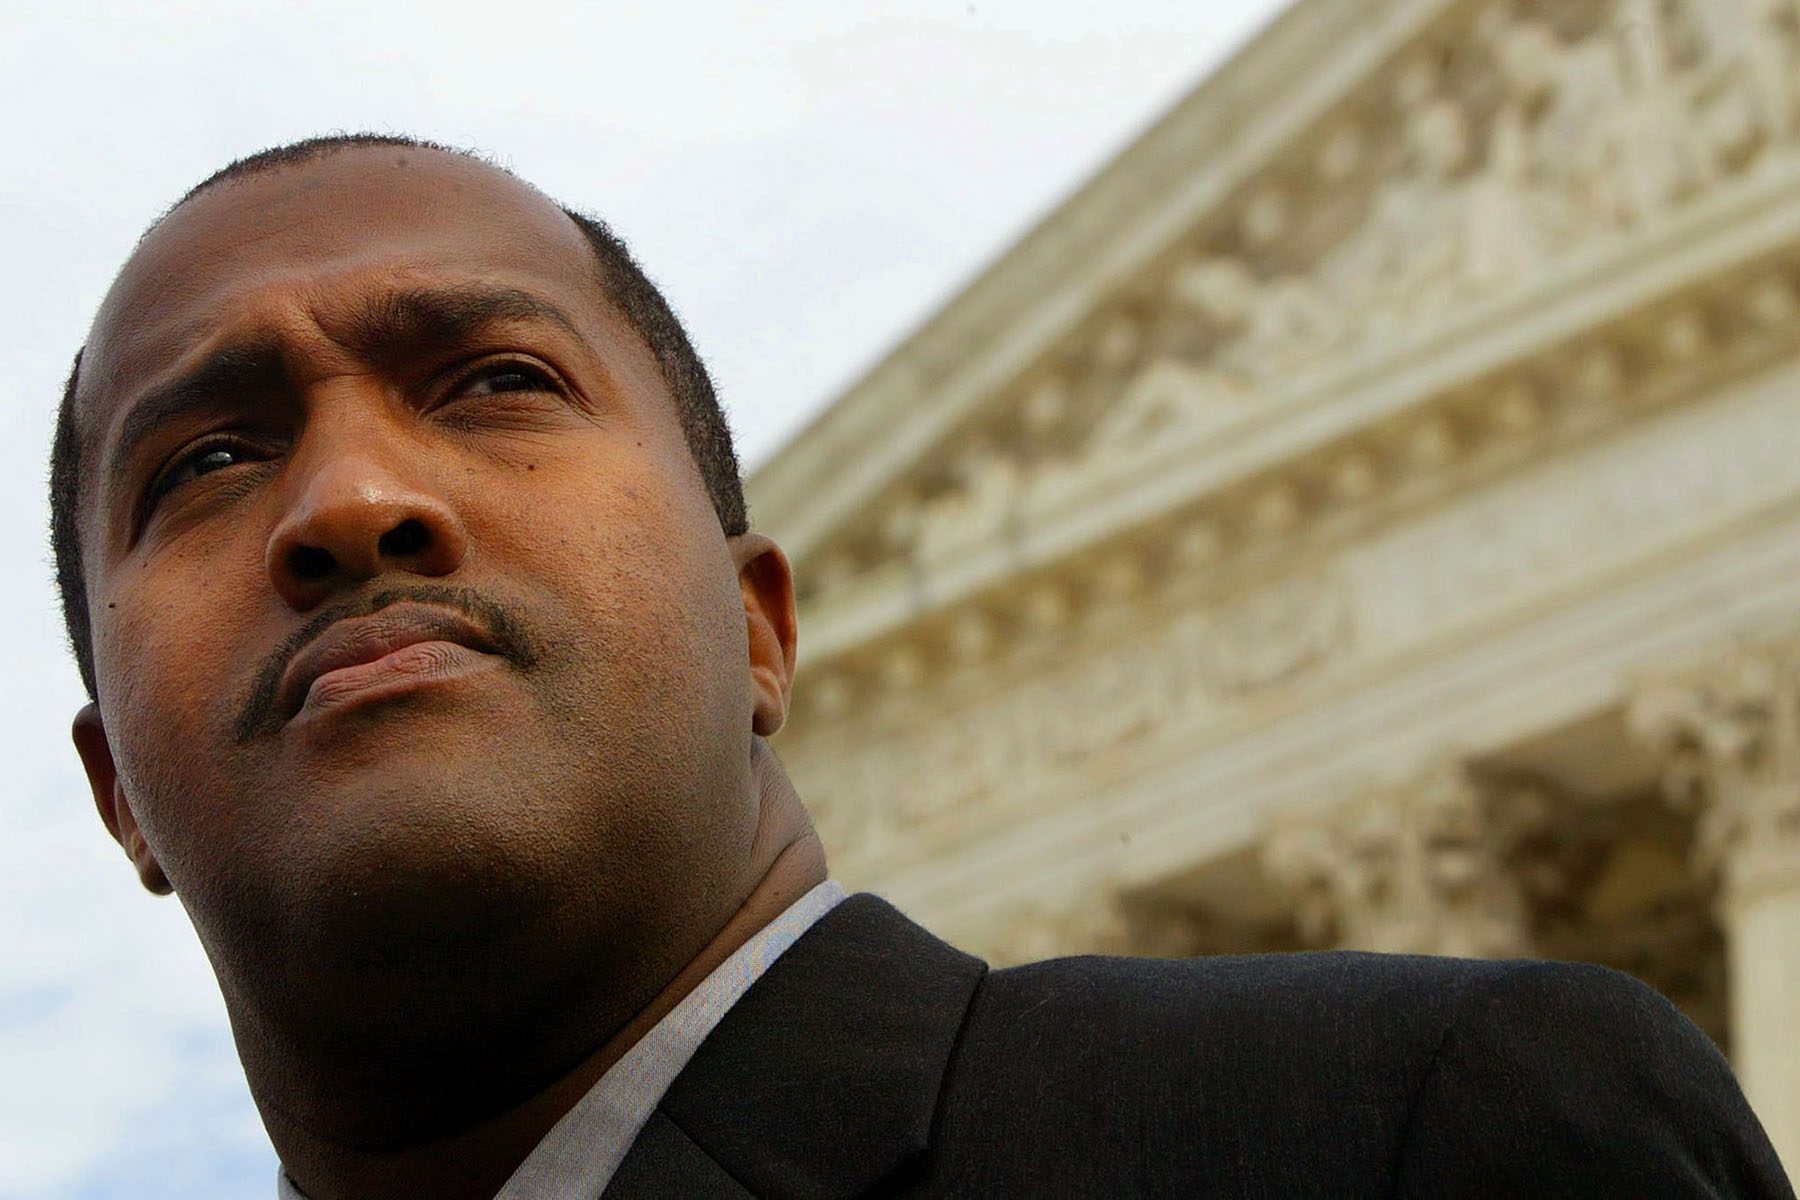 Roderick Jackson stands outside the Supreme Court